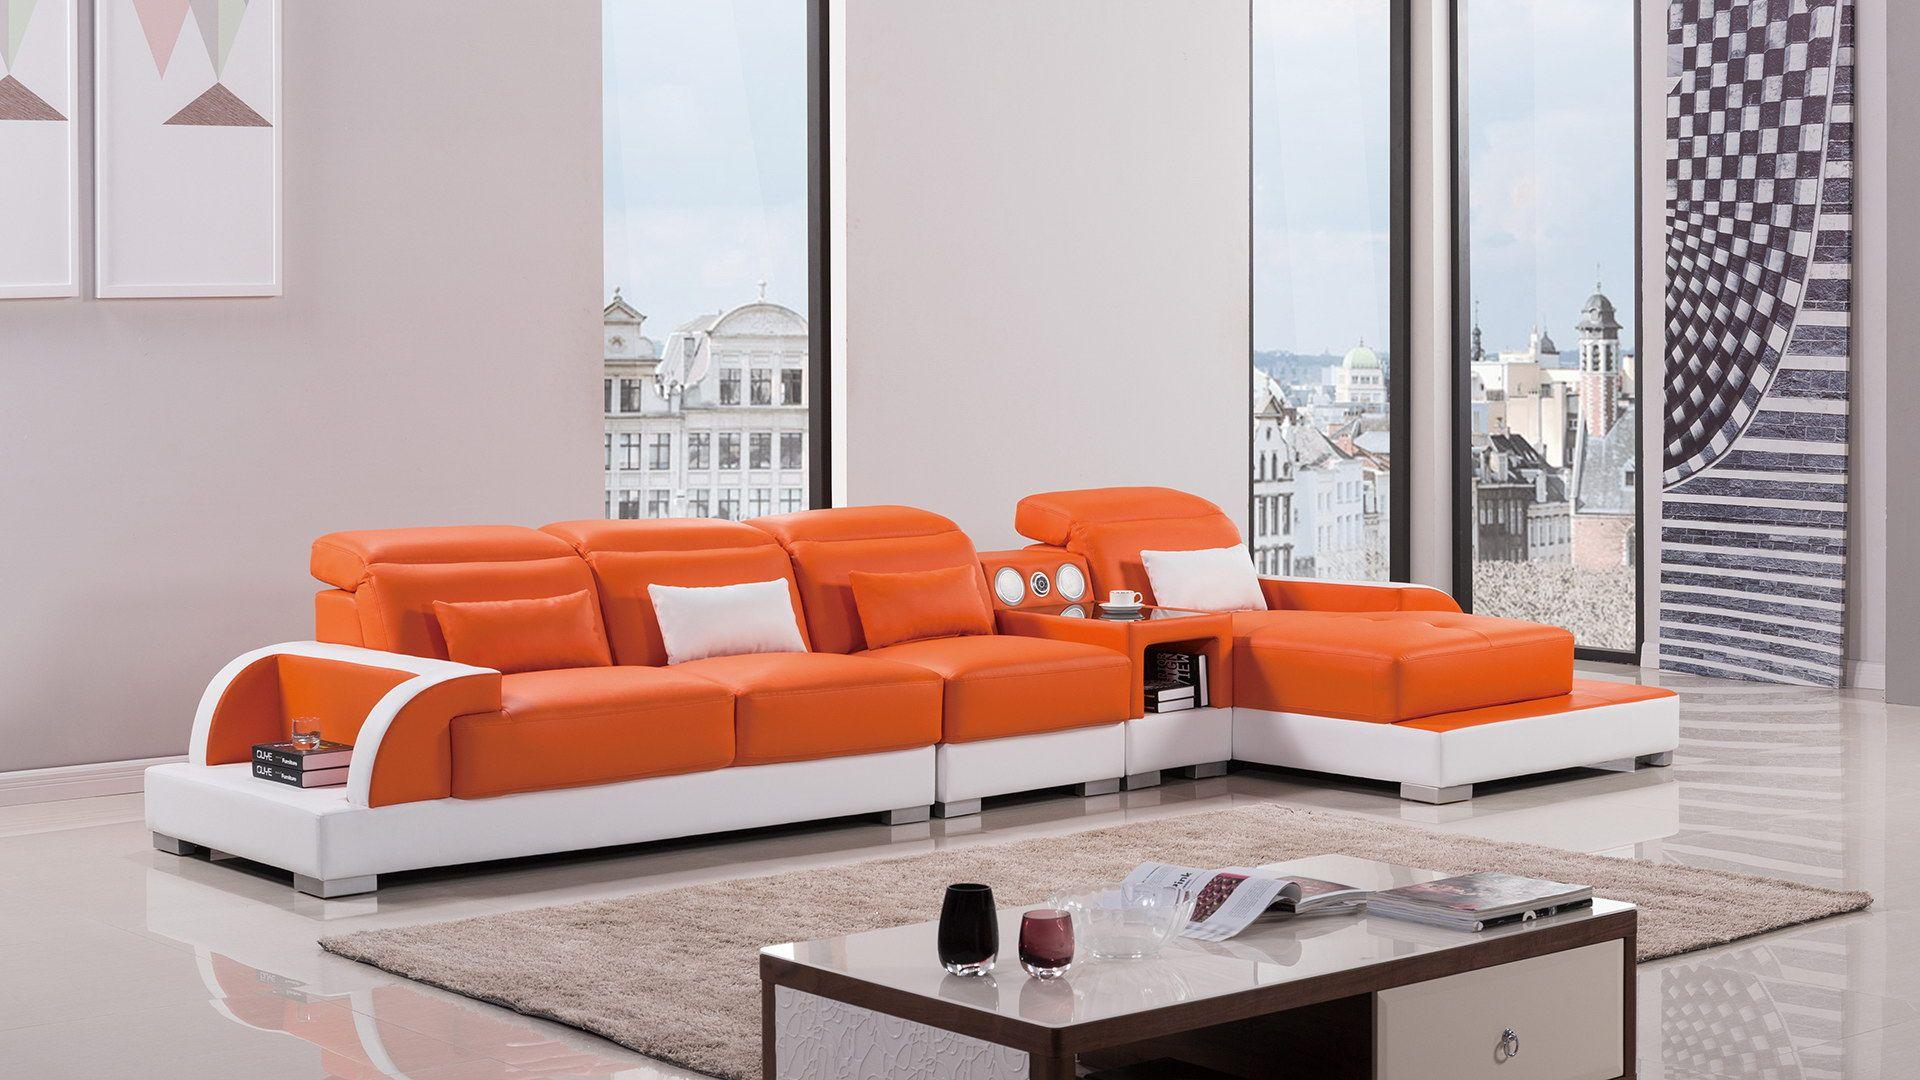 Contemporary, Modern Sectional Sofa AE-LD812-ORG.IV AE-LD812R-ORG.IV in White, Orange Faux Leather